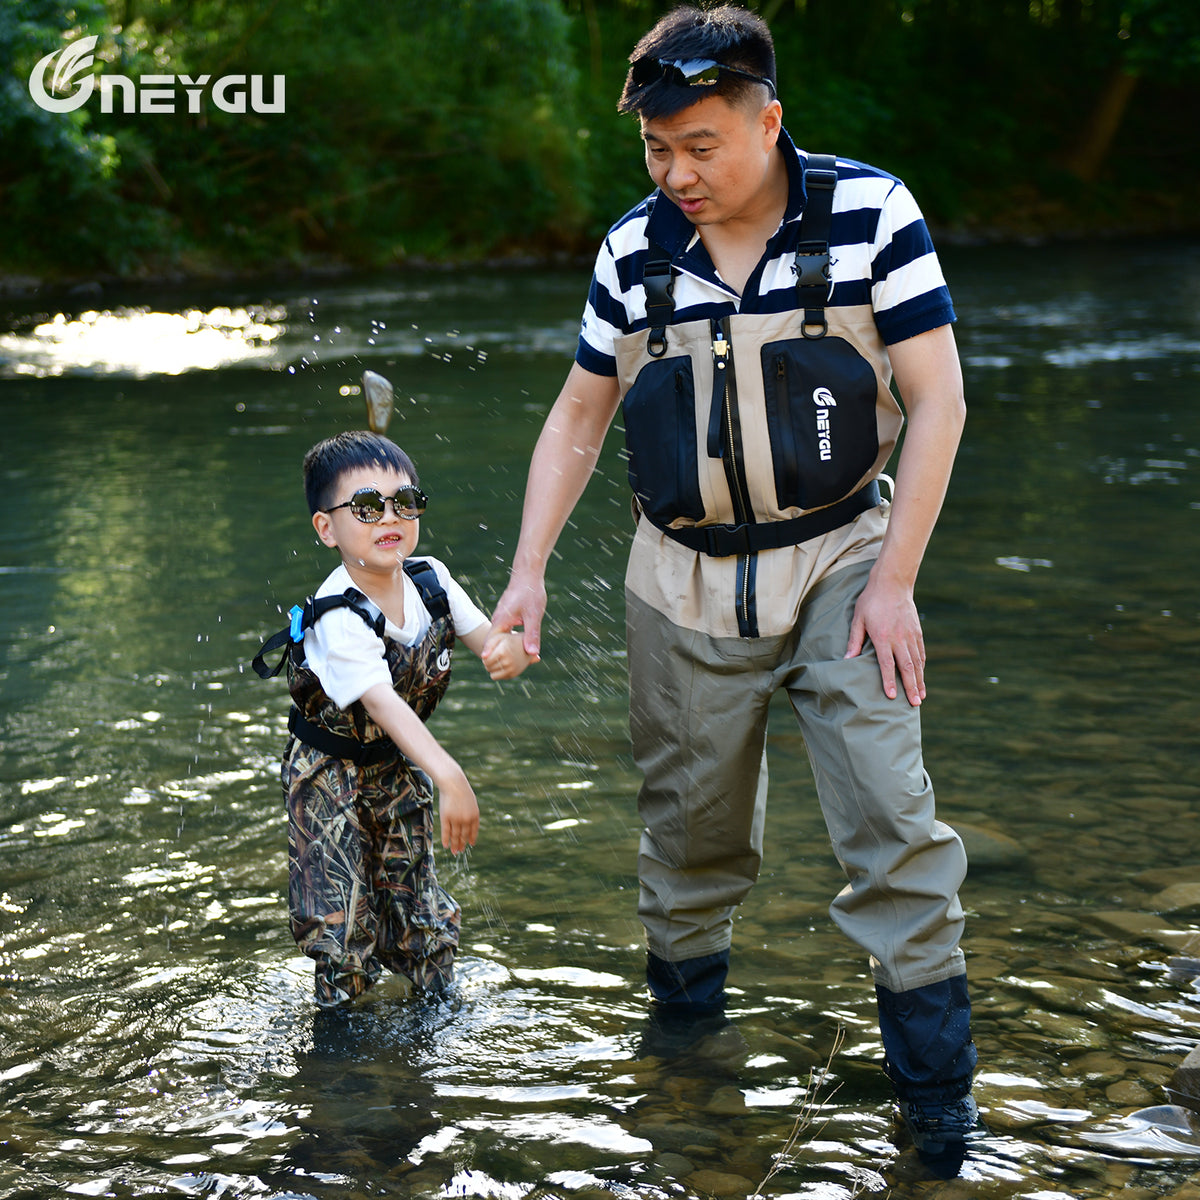 NeyGu Childrens Fishing Waders with Boots, Kids Chest Camo Waders with Boots,  youth fishing waders, toddlers boys fishing wader - AliExpress